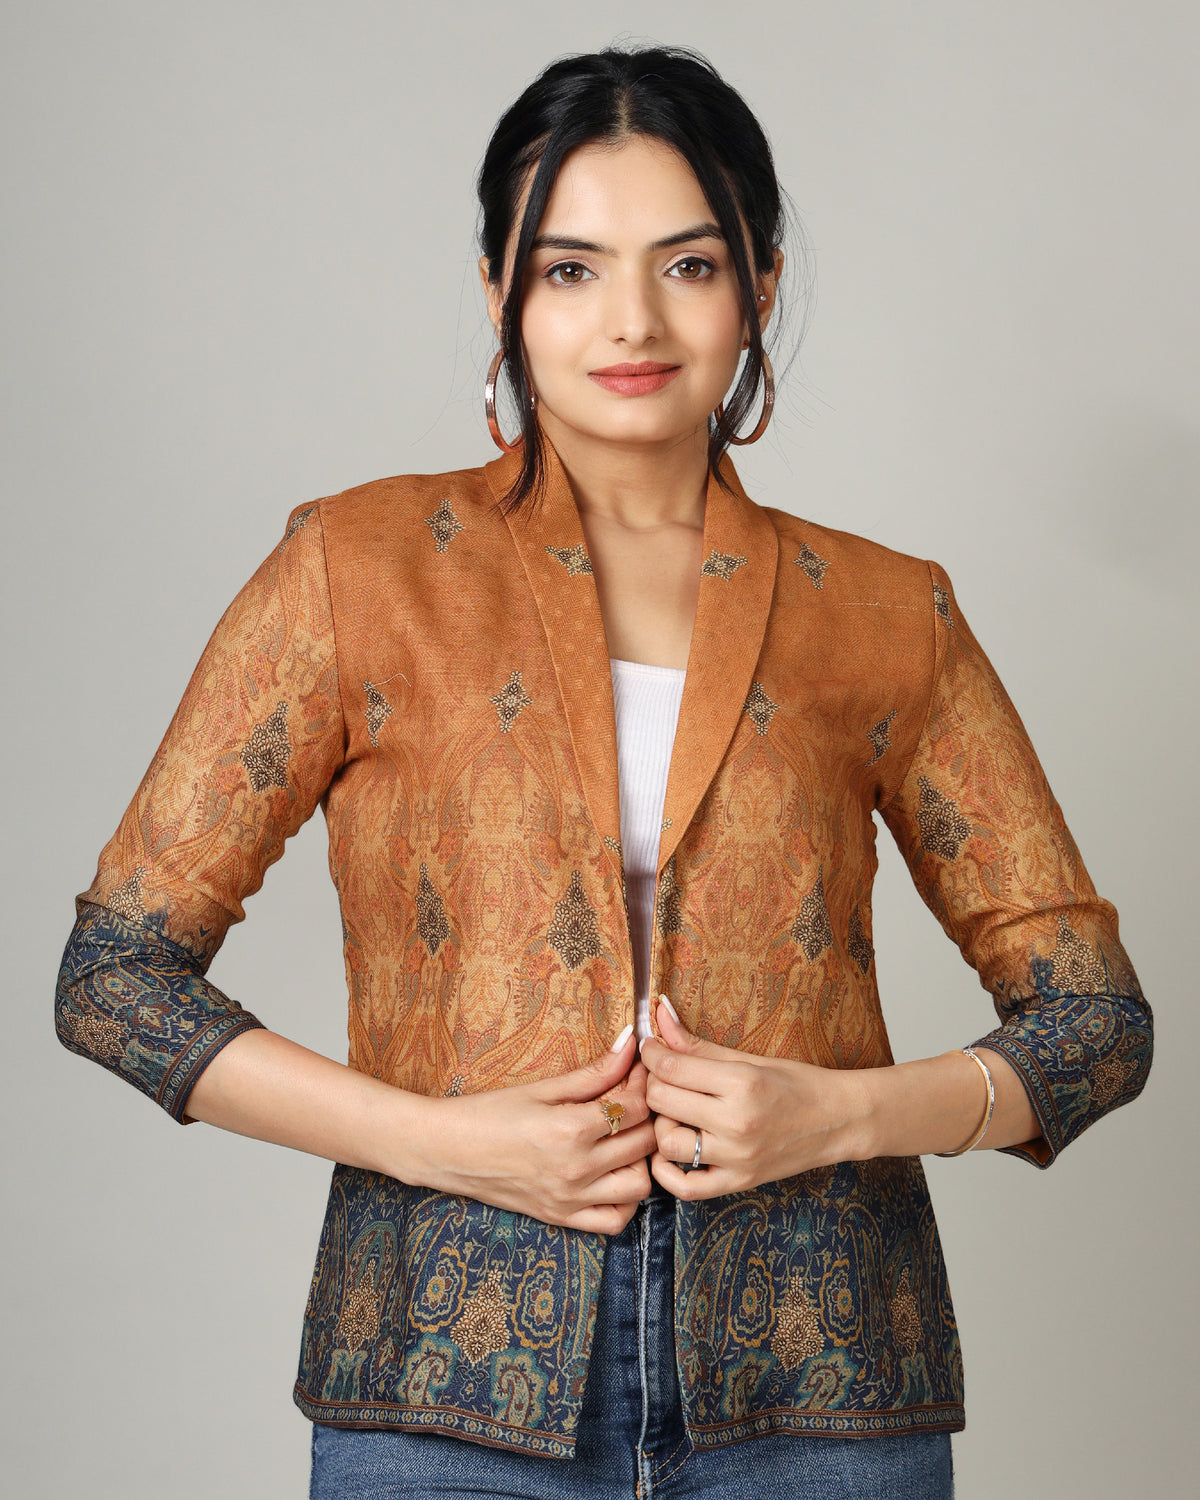 Cultural Charm In Every Stitch: Women's Ethnic Jacket